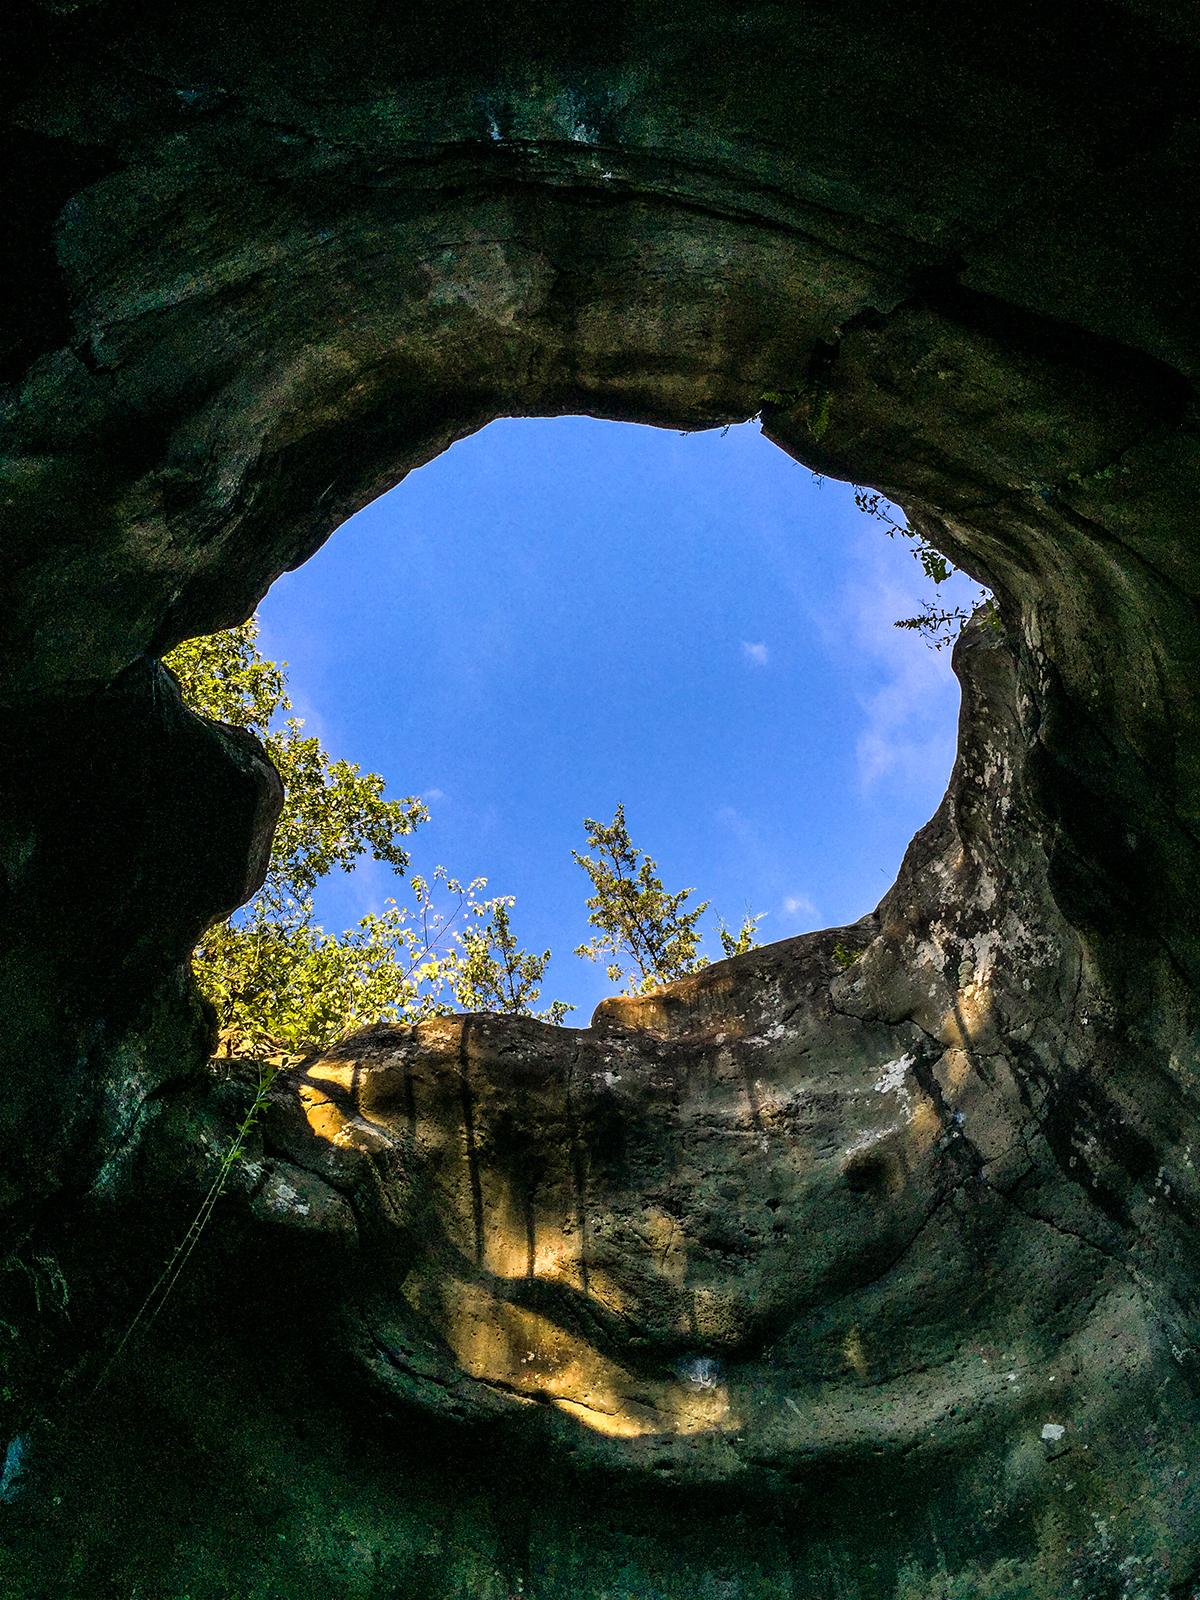 Inside the Bake Oven on the Glacial Potholes Trail at Interstate State Park